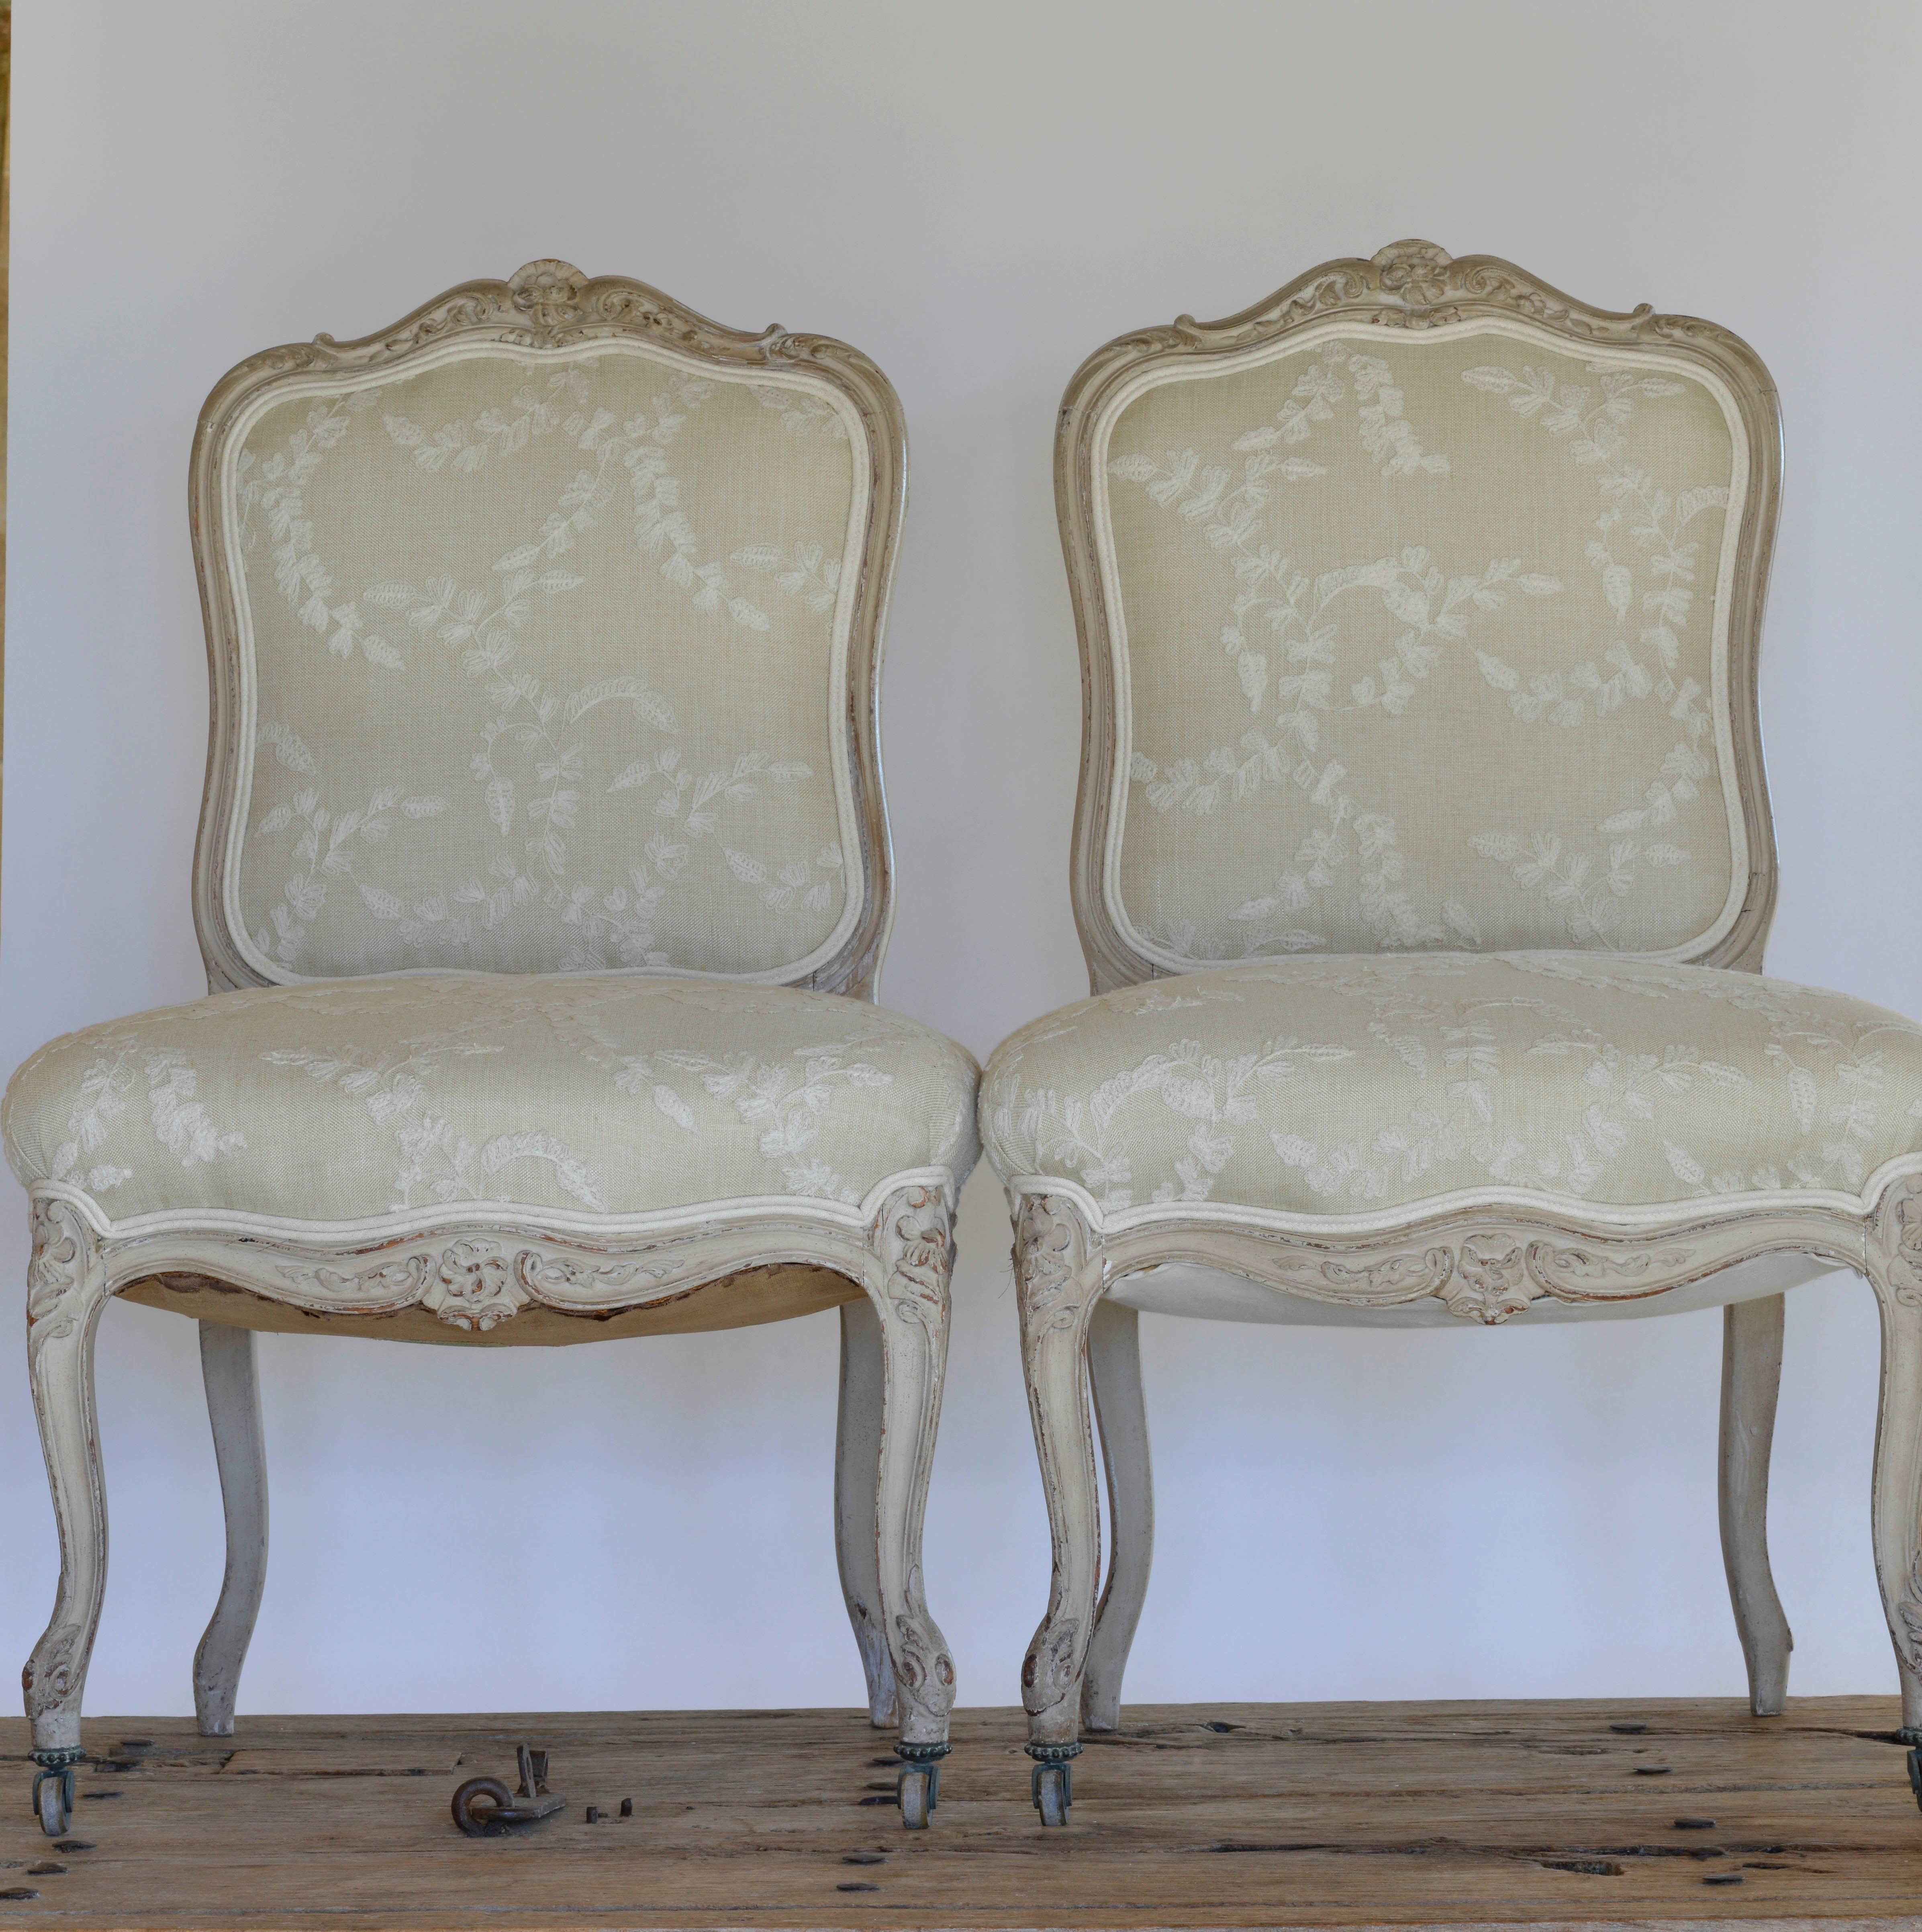 This pair of French side chairs with original painted finish, original castered feet and reupholstered in a Crewel linen fit in any decor.